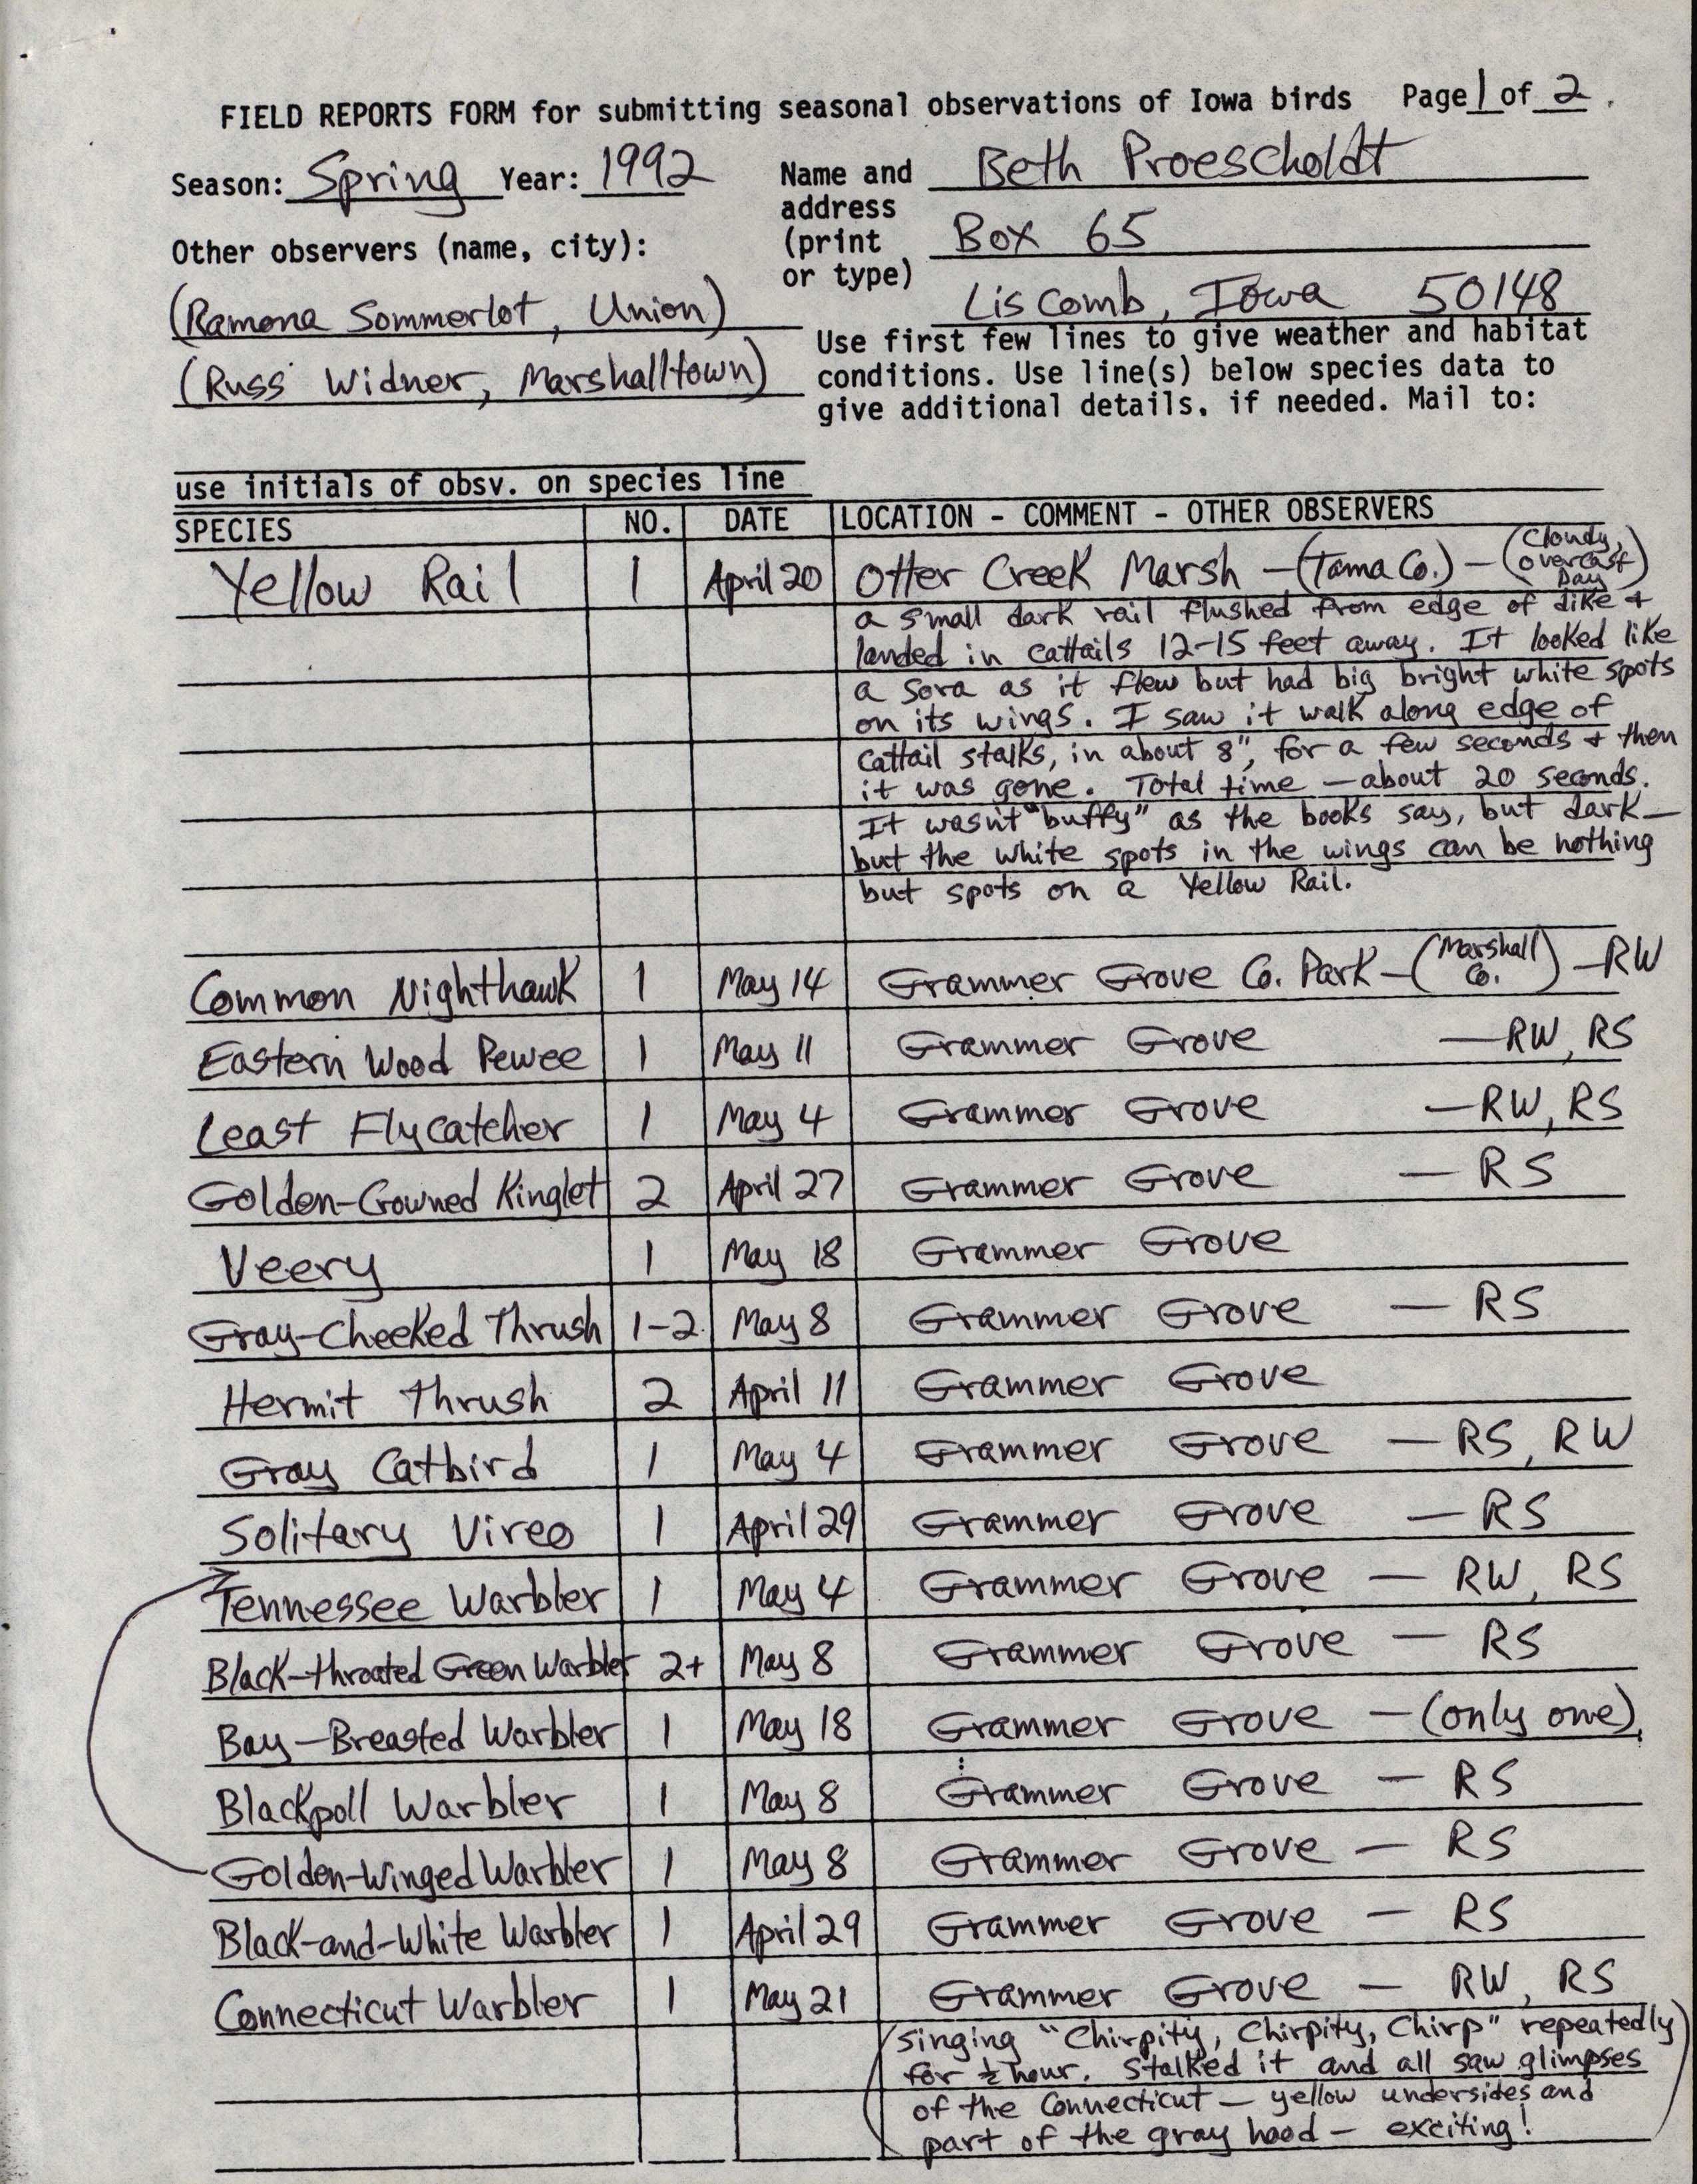 Field reports form for submitting seasonal observations of Iowa birds, Beth Proescholdt, spring 1992